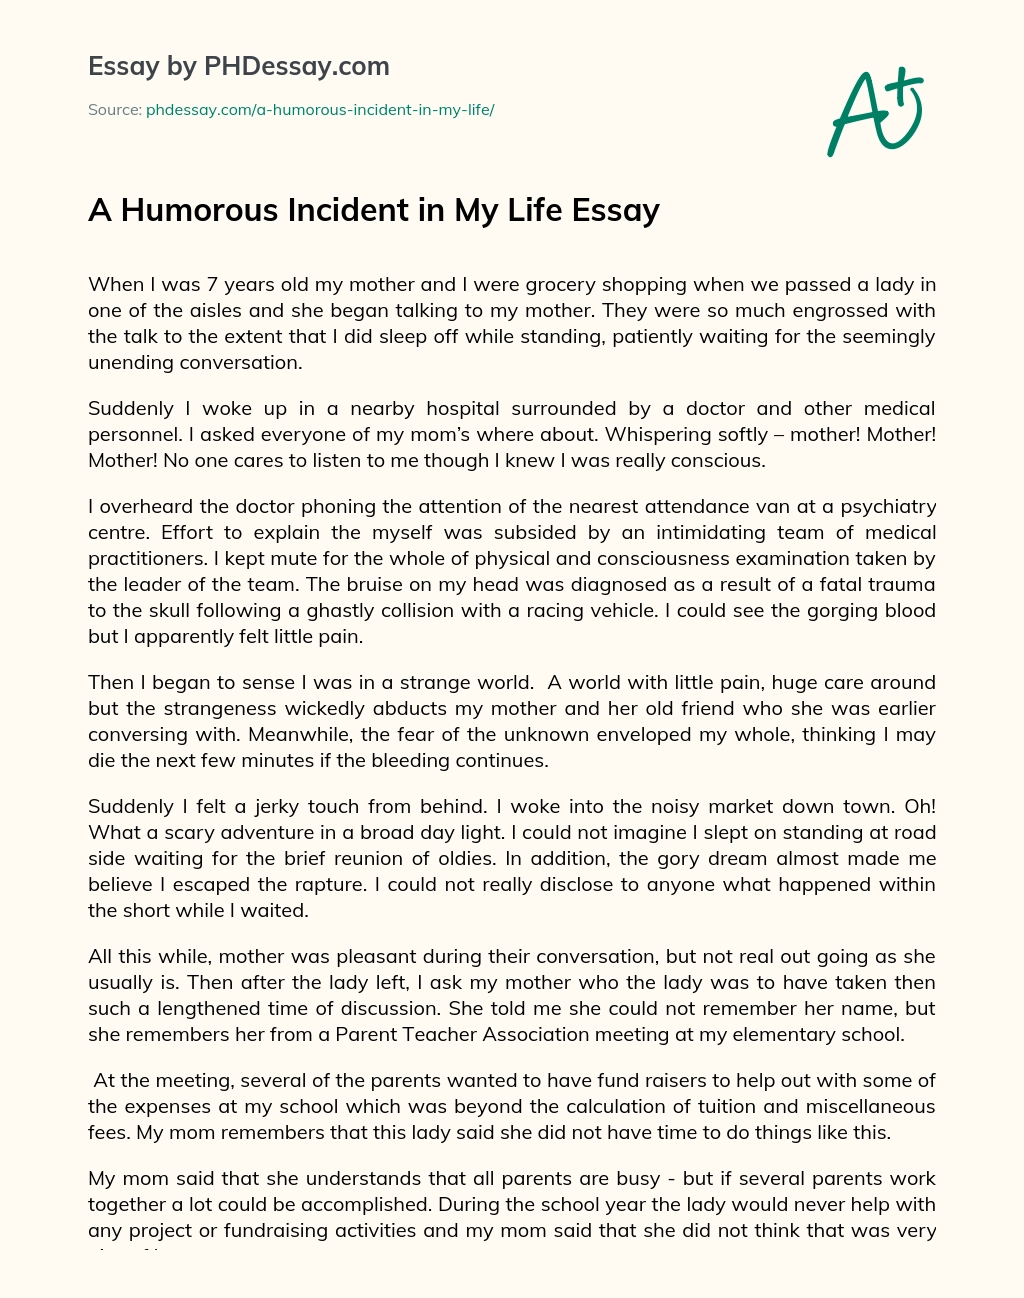 A Humorous Incident in My Life Essay essay